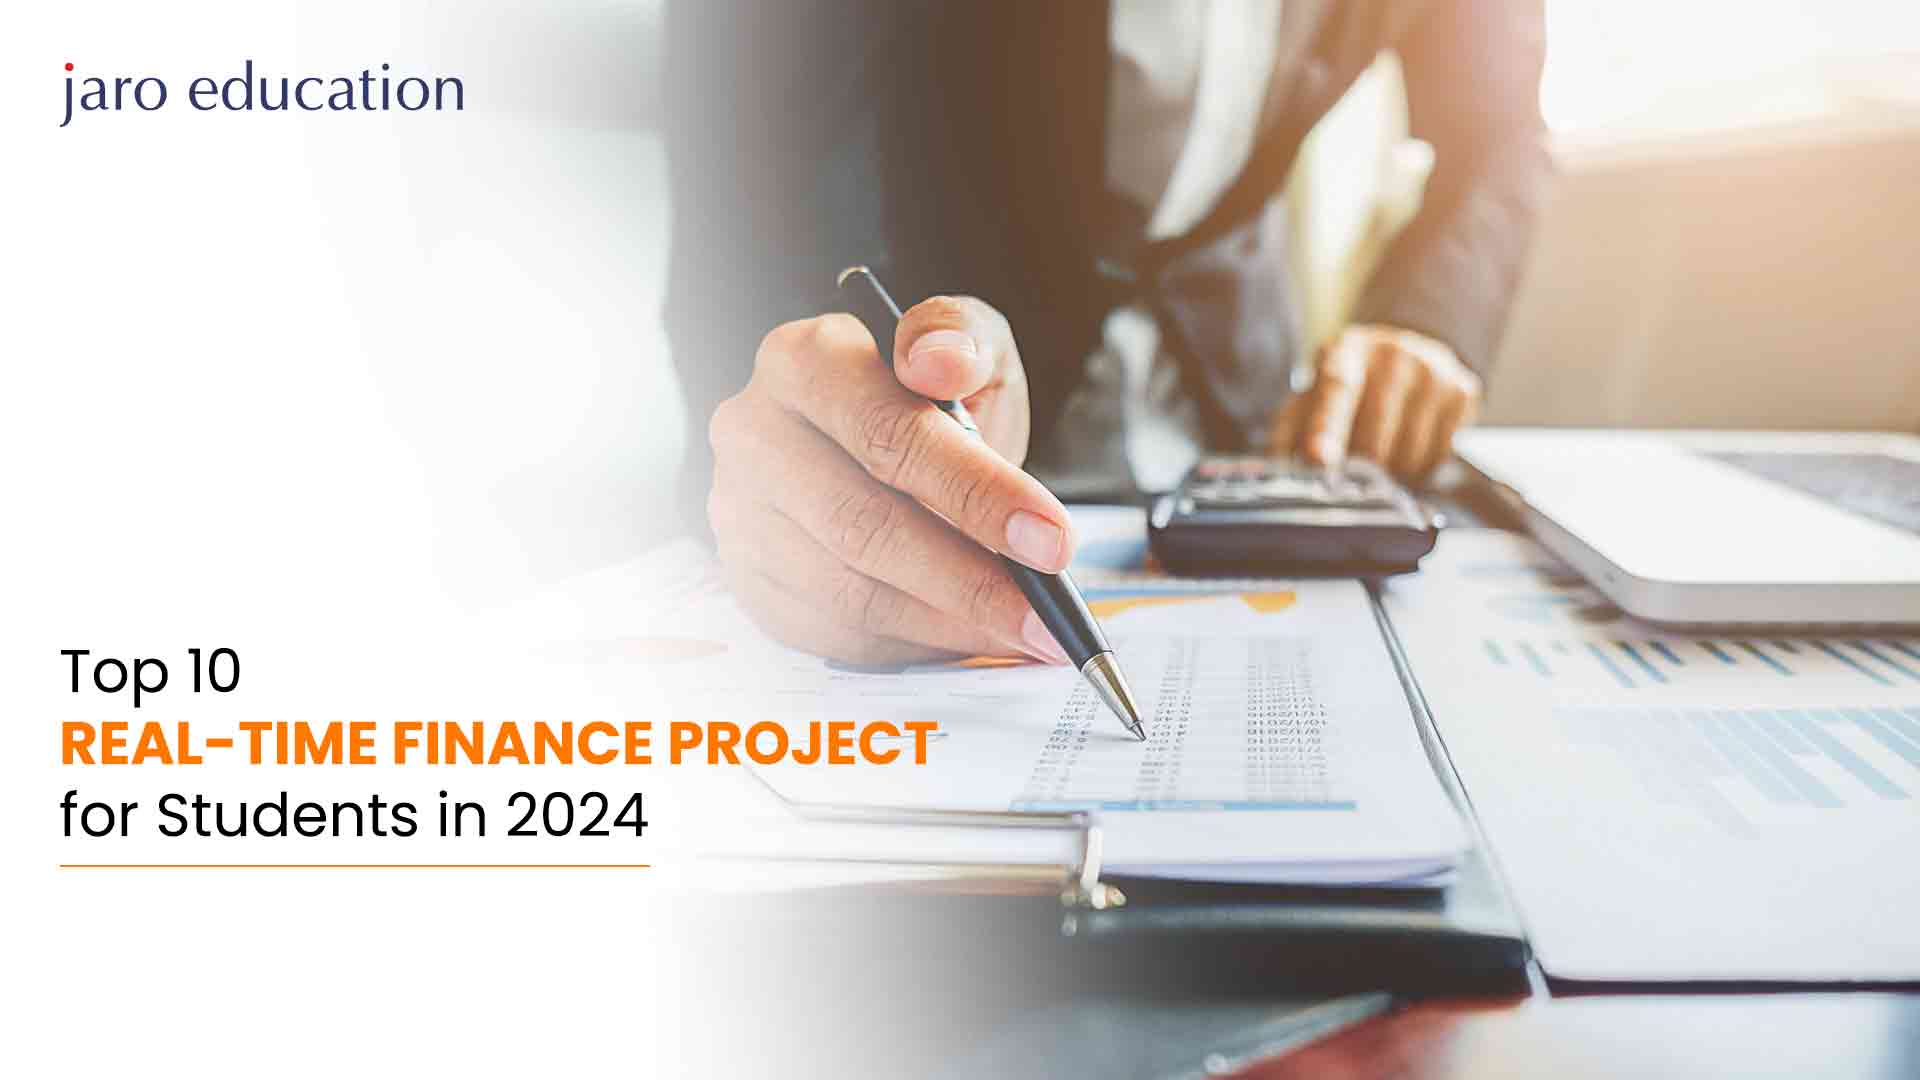 Top 10 Real Time Finance Project for Students in 2024